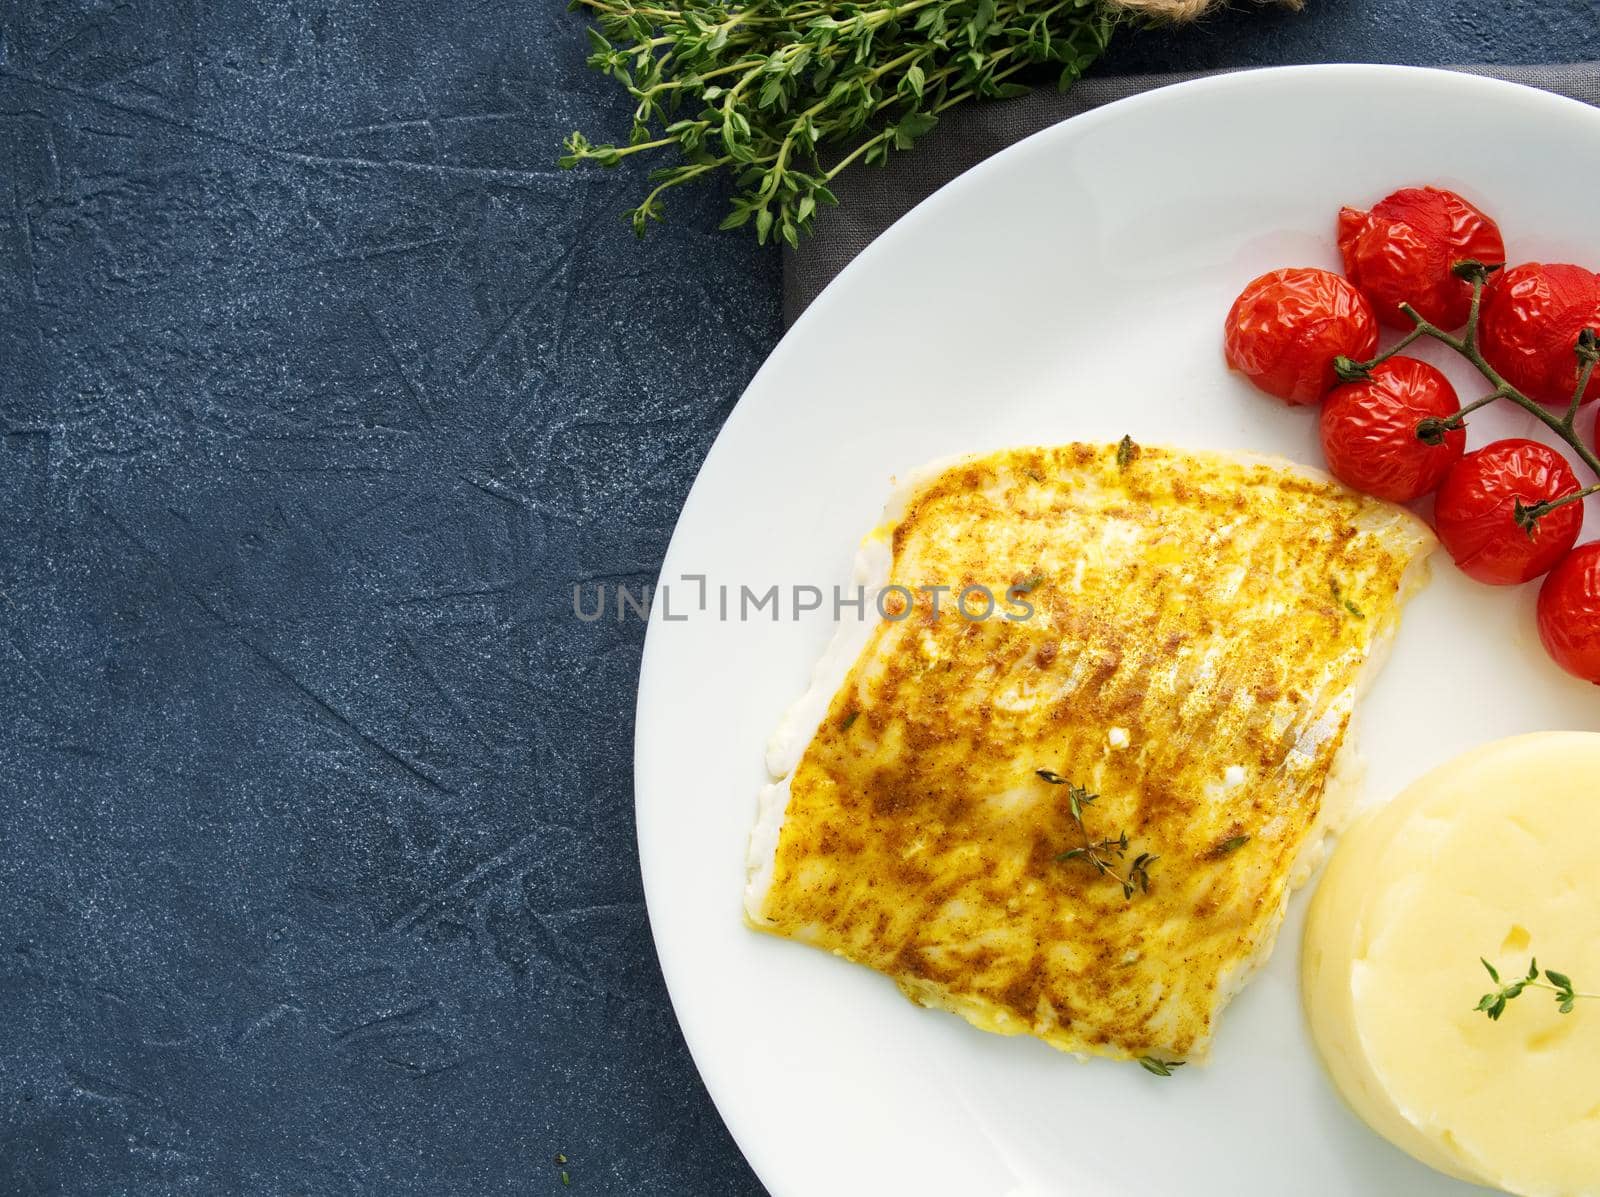 Fish cod baked in oven with mashed potatoes, tomatoes, diet healthy food. Dark gray background by NataBene